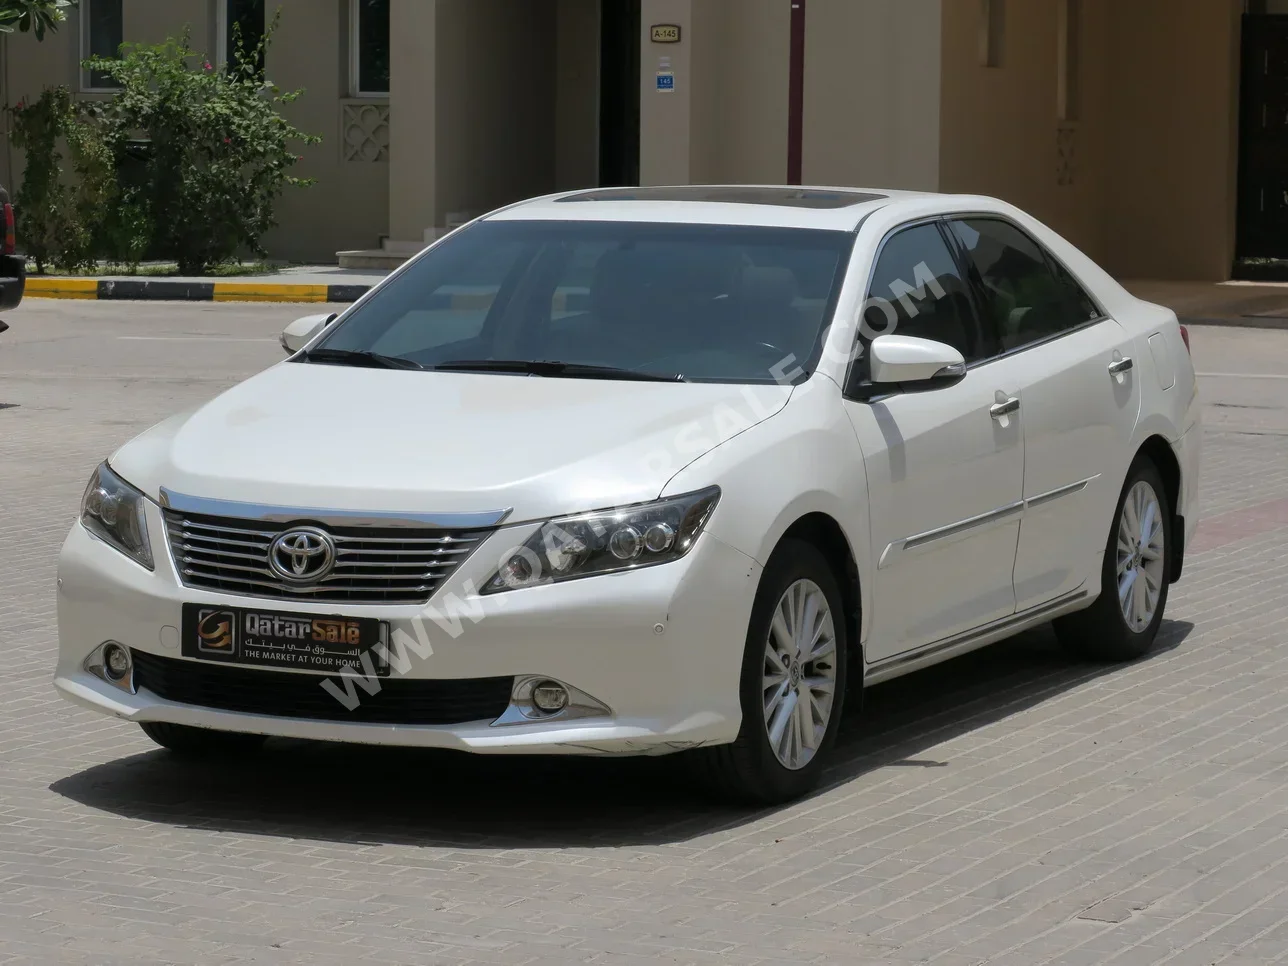 Toyota  Aurion  2016  Automatic  120,000 Km  6 Cylinder  Front Wheel Drive (FWD)  Sedan  Pearl